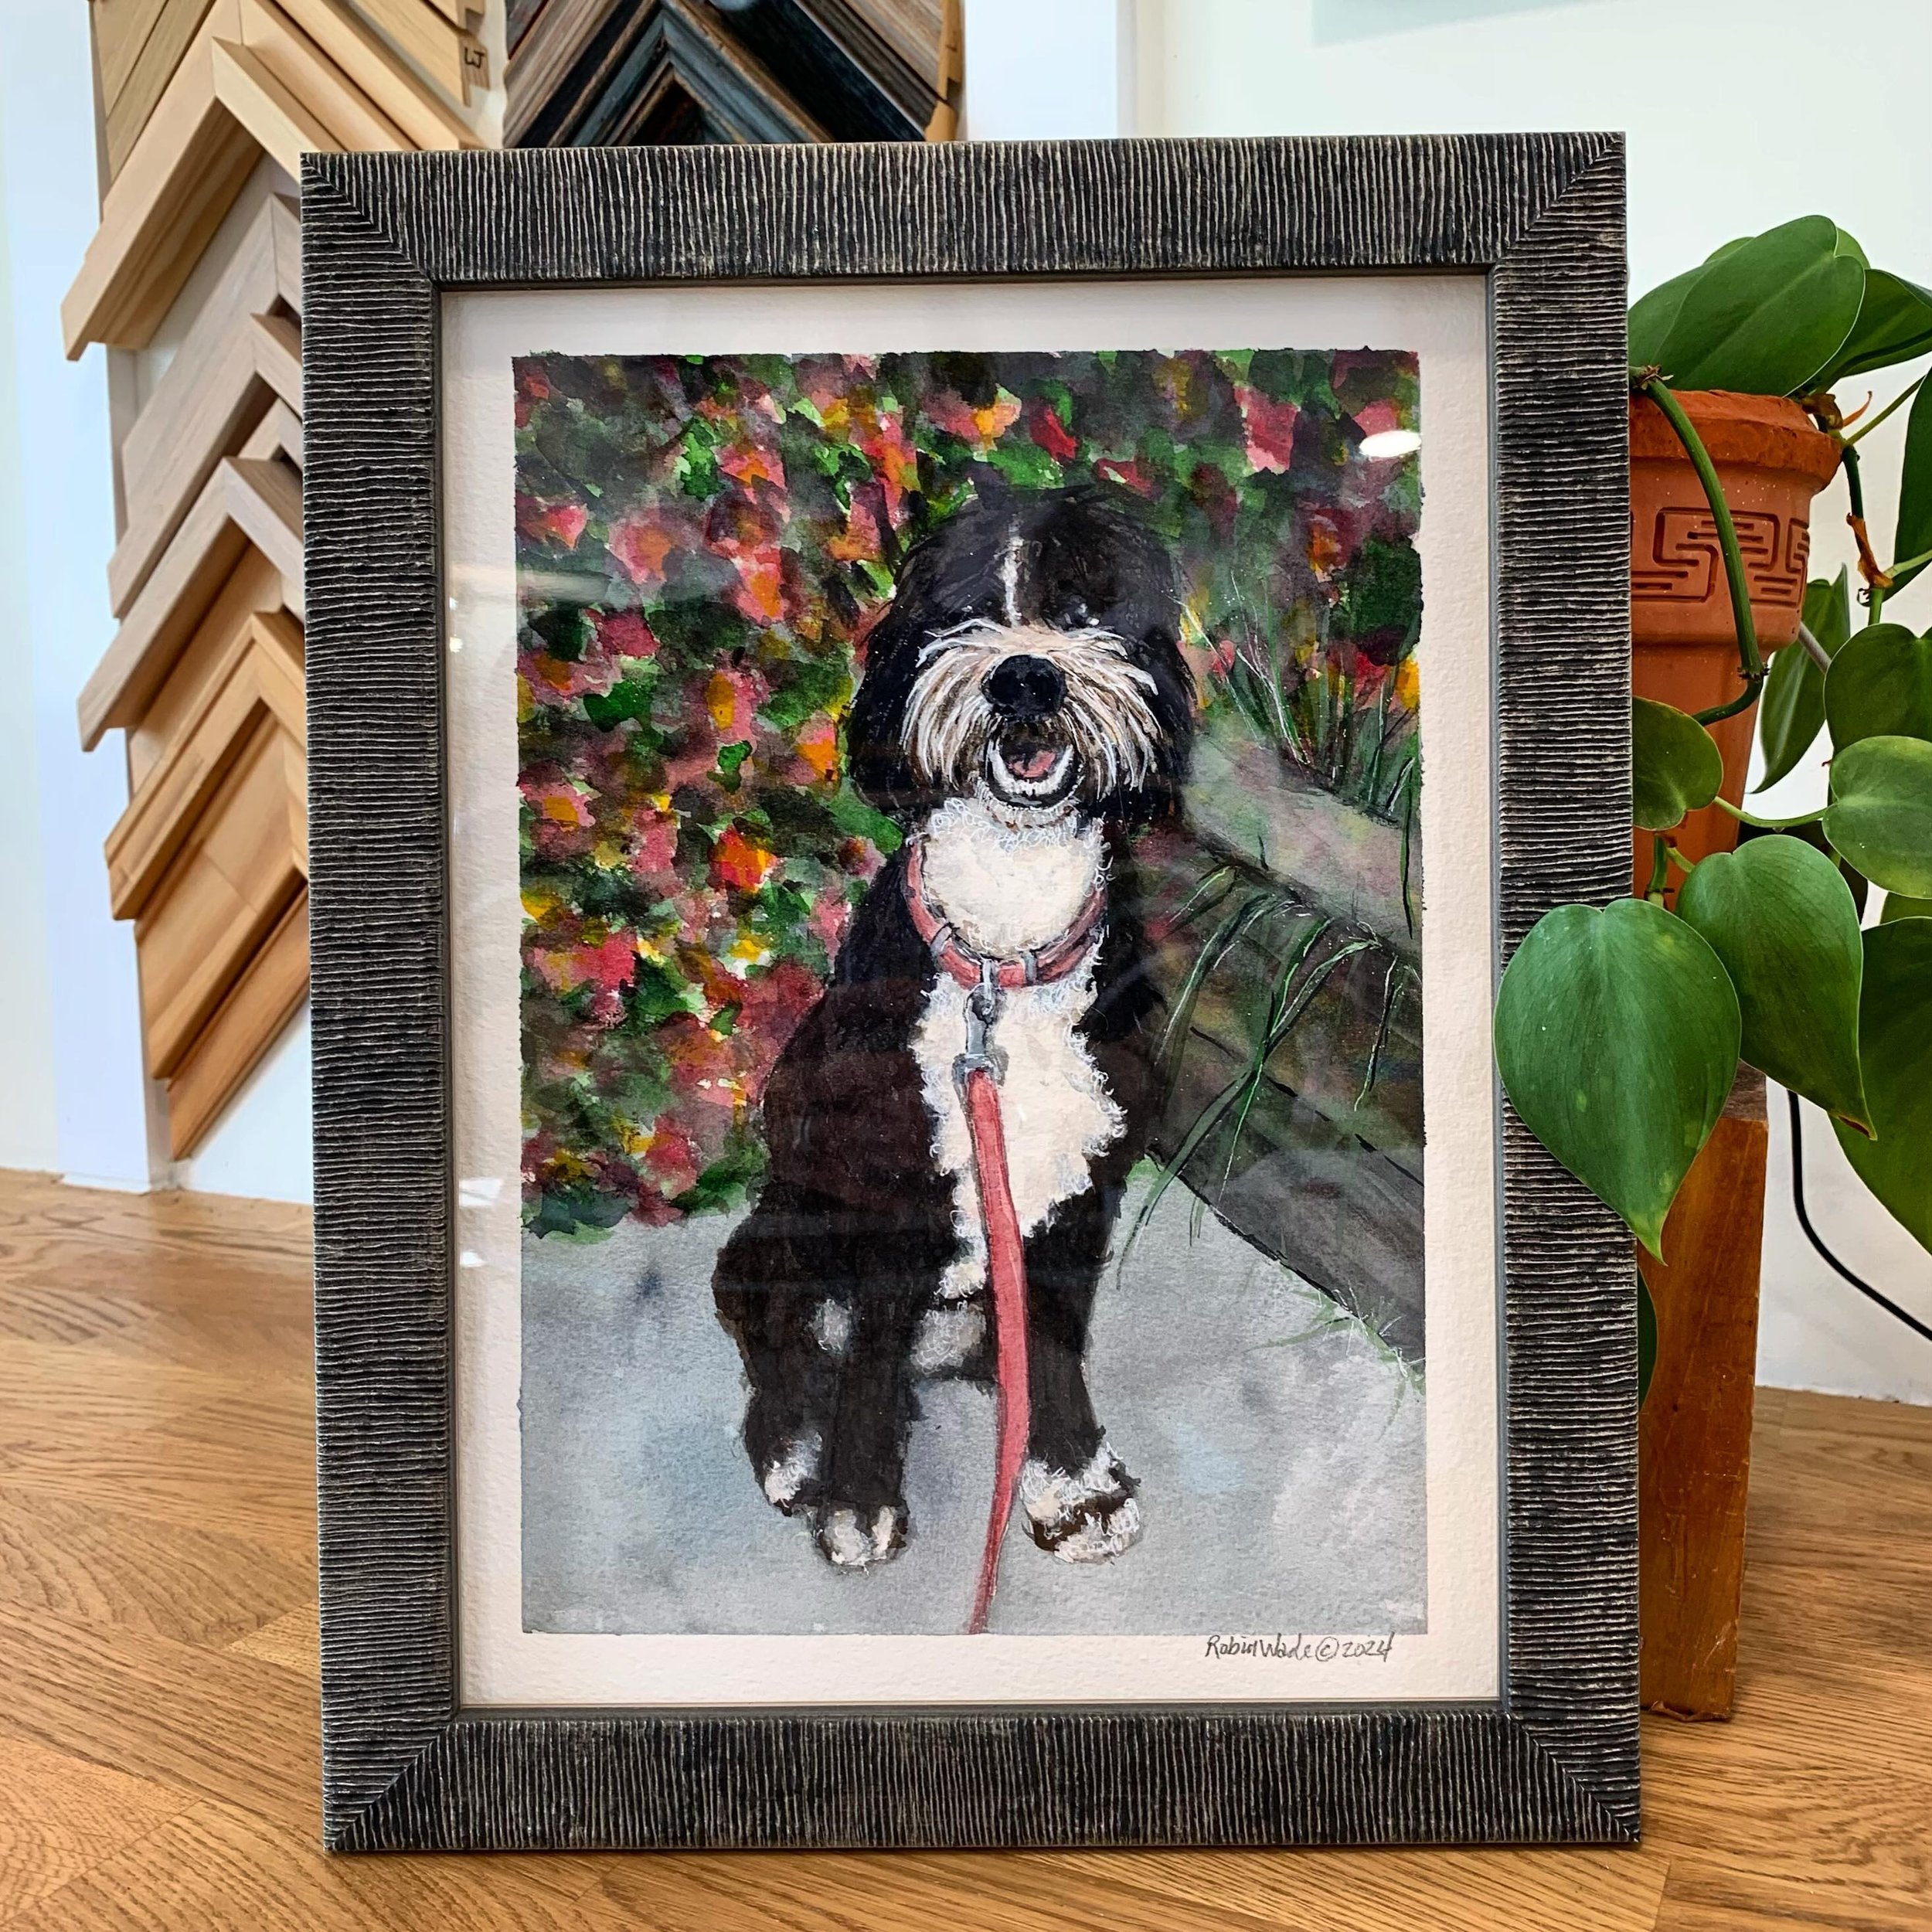 How adorable is this doggo painting that we custom framed?! Too cute! 🐶 Custom framing is by appointment only, but you can also call the day of at 858-270-7820 to see if we have any openings. Tap the &lsquo;book now&rsquo; button in our profile to s